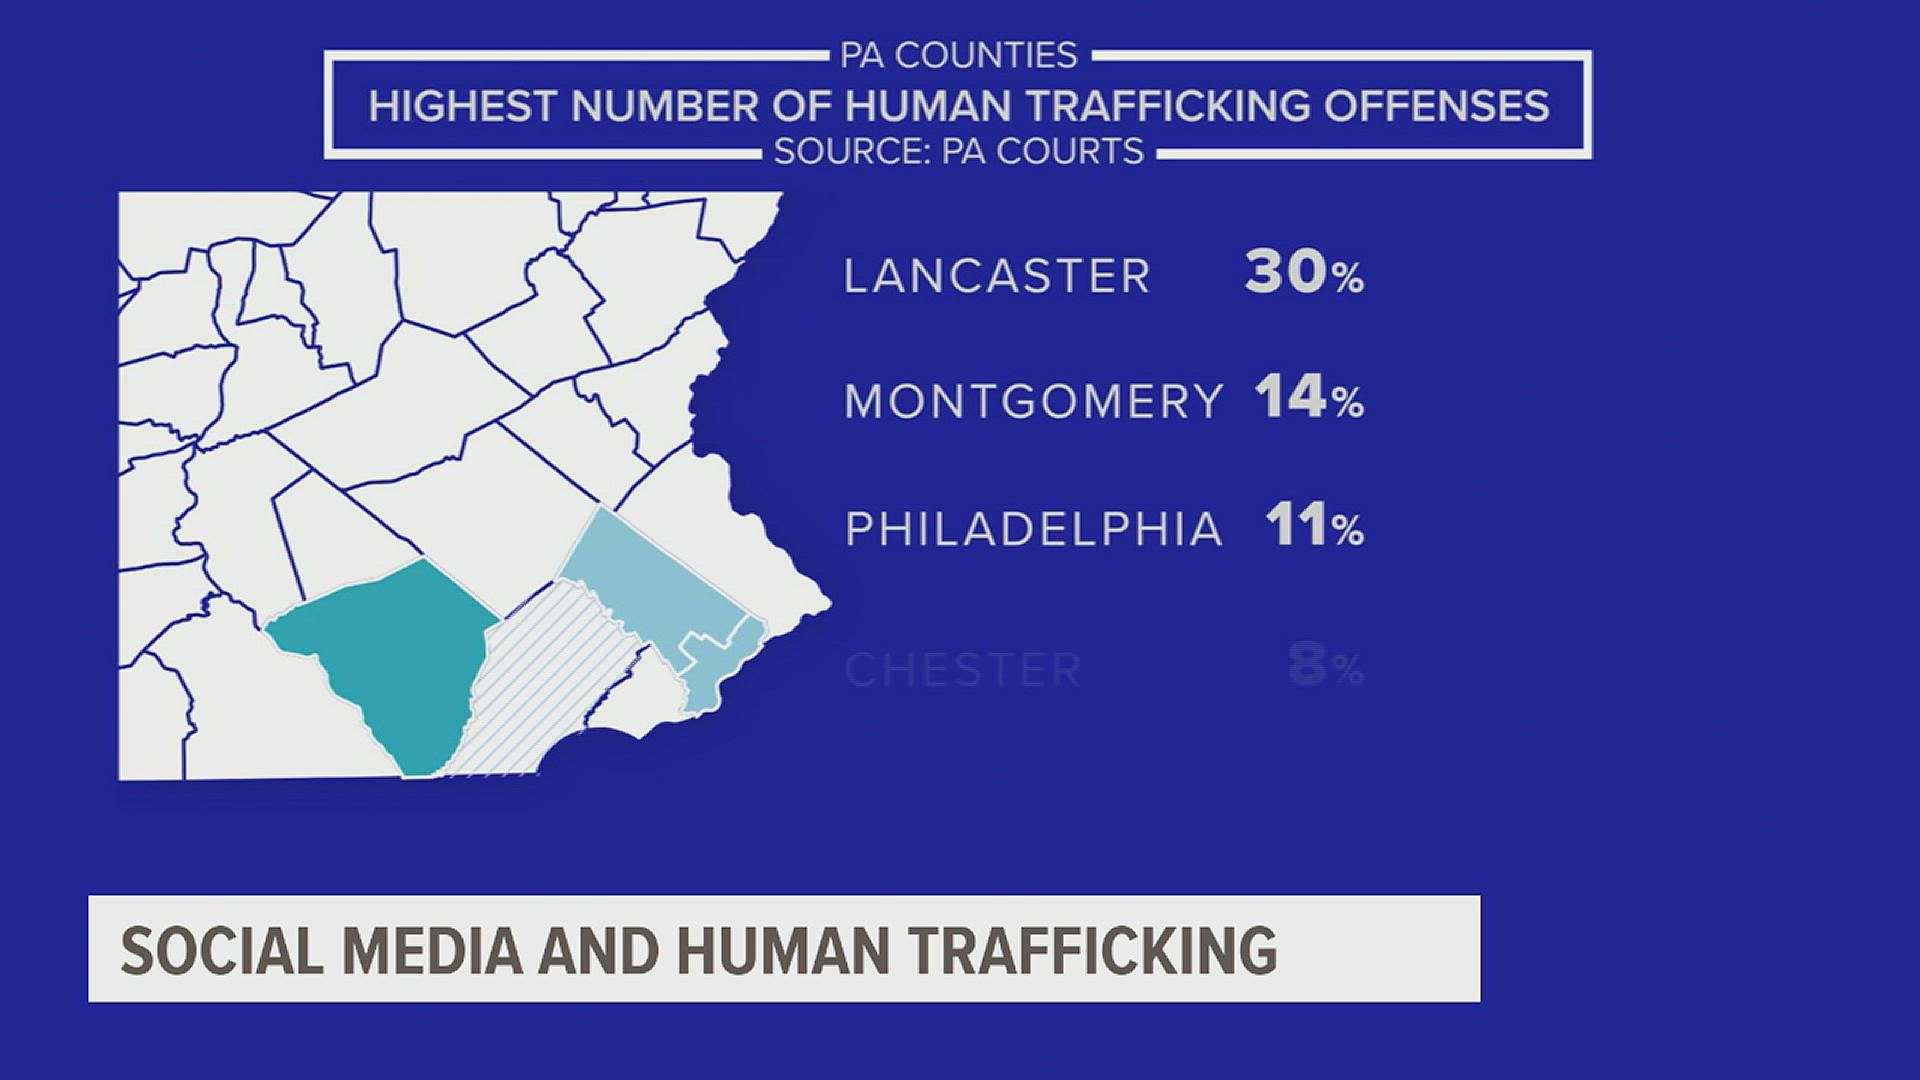 According to Pennsylvania Courts, Lancaster County has the highest number of human trafficking offenses filed in the last five years.